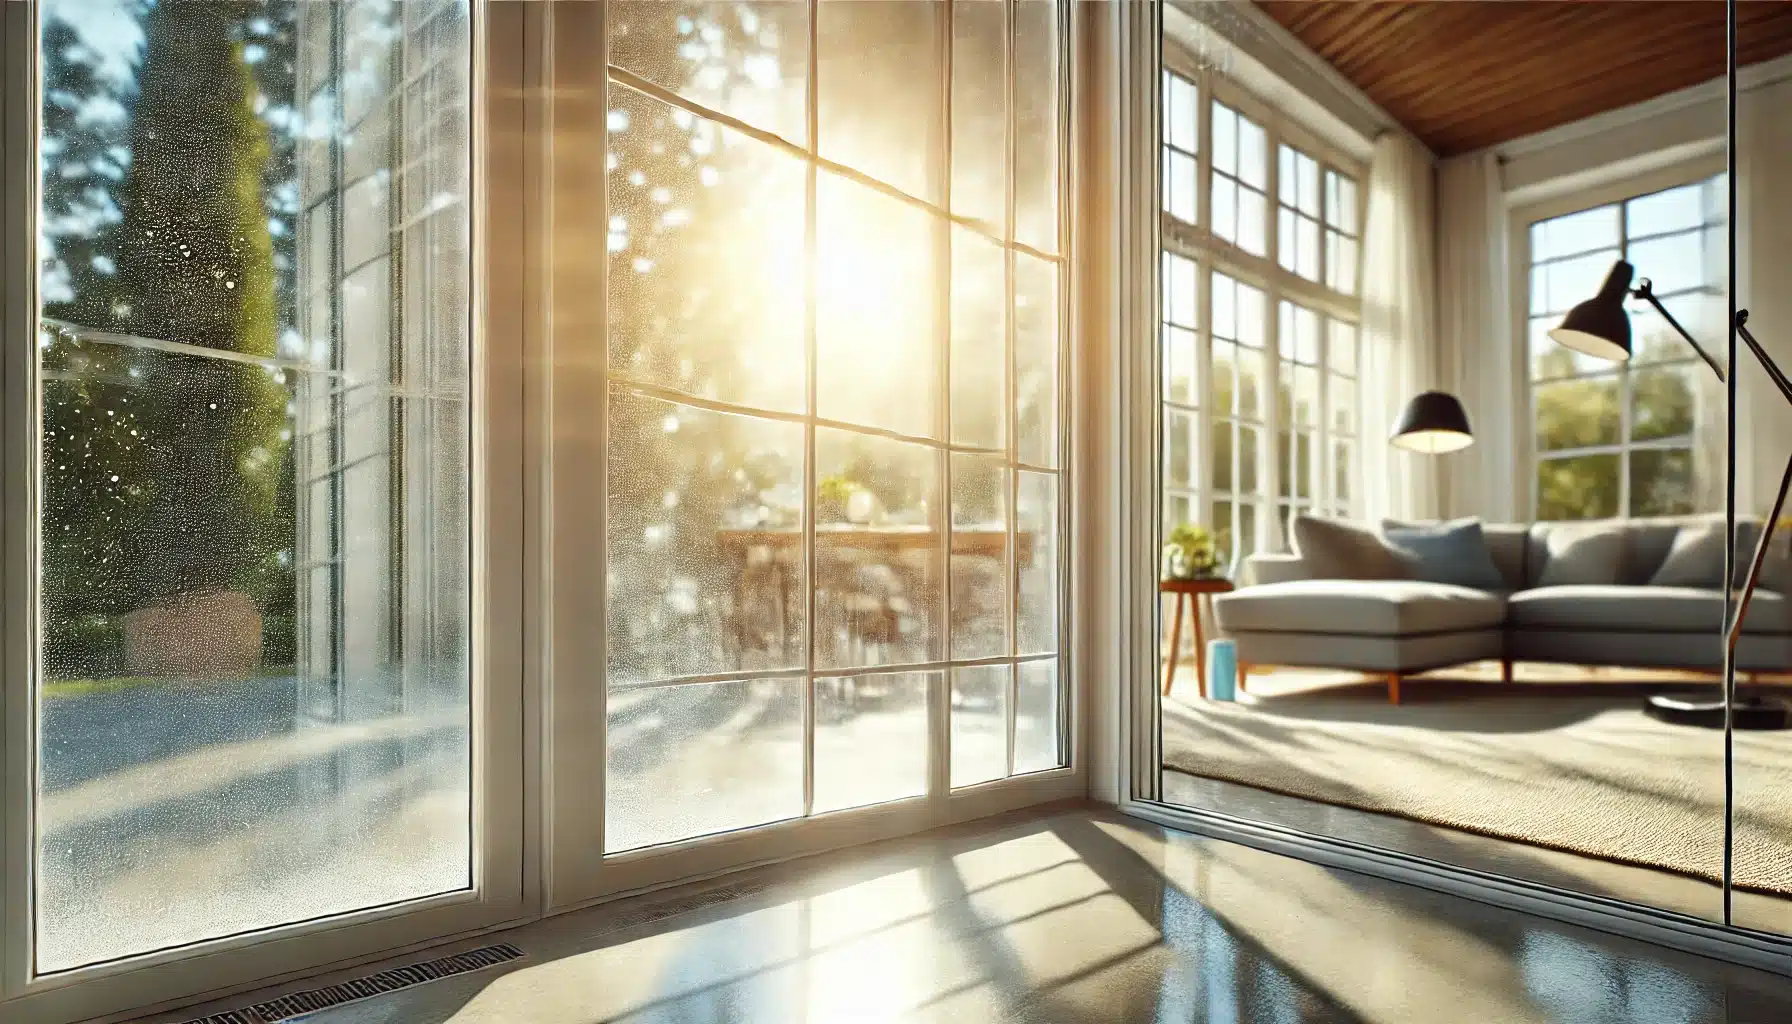 Sparkling clean windows with bright sunlight streaming through in a serene room.